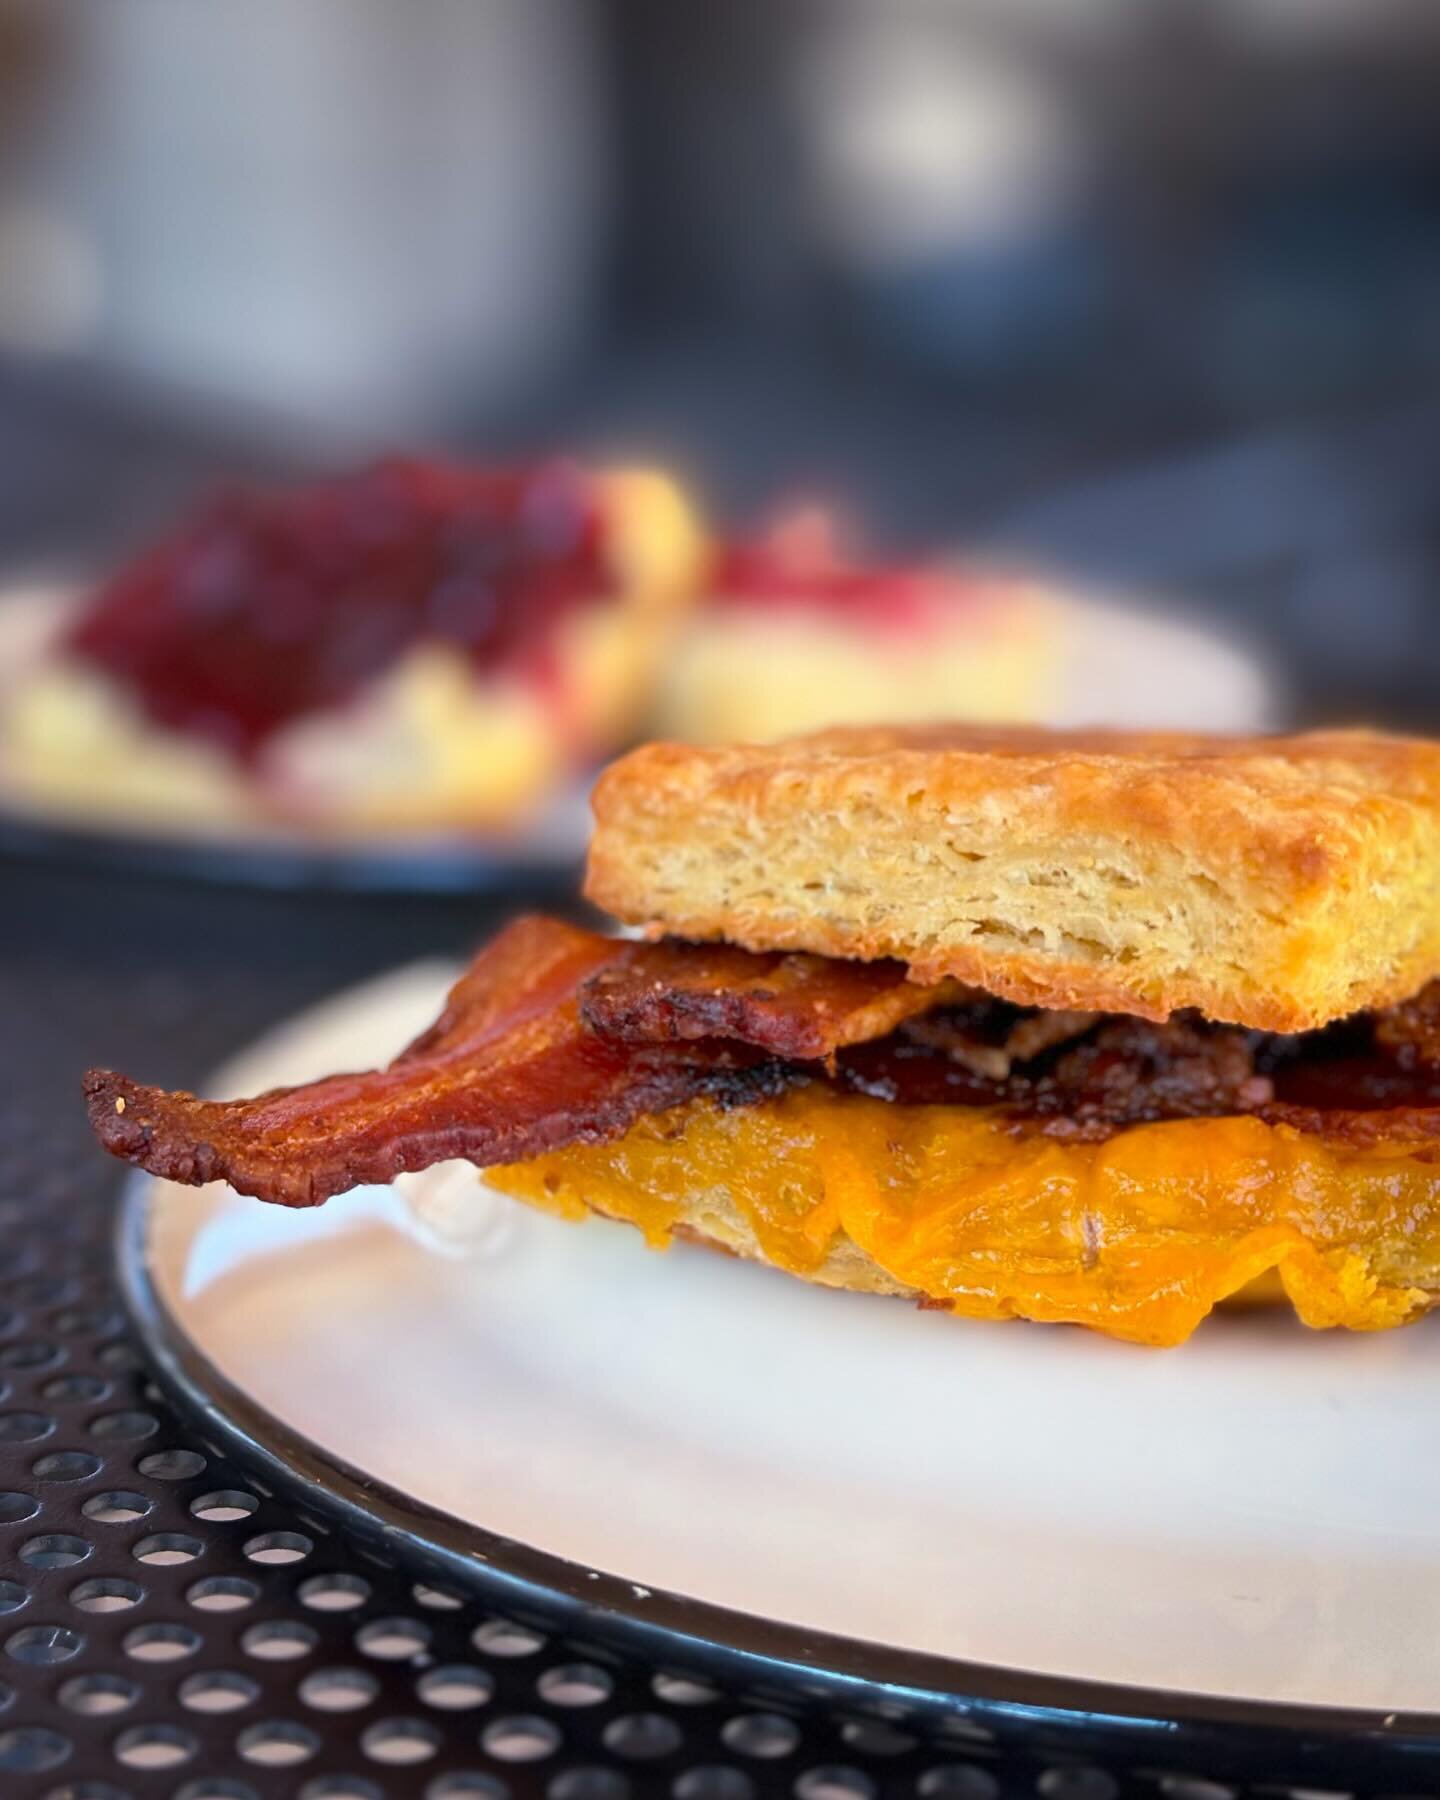 Breakfast got jealous of all the lunch sammies...
So we added ONE MORE SAMMIE to our line up:
The Bacon Cheddar Biscuit Sammie! 

Biscuits made from scratch from @honeypie_bakeshop, with gooey cheese and crispy bacon. Everything your weekend needs (t